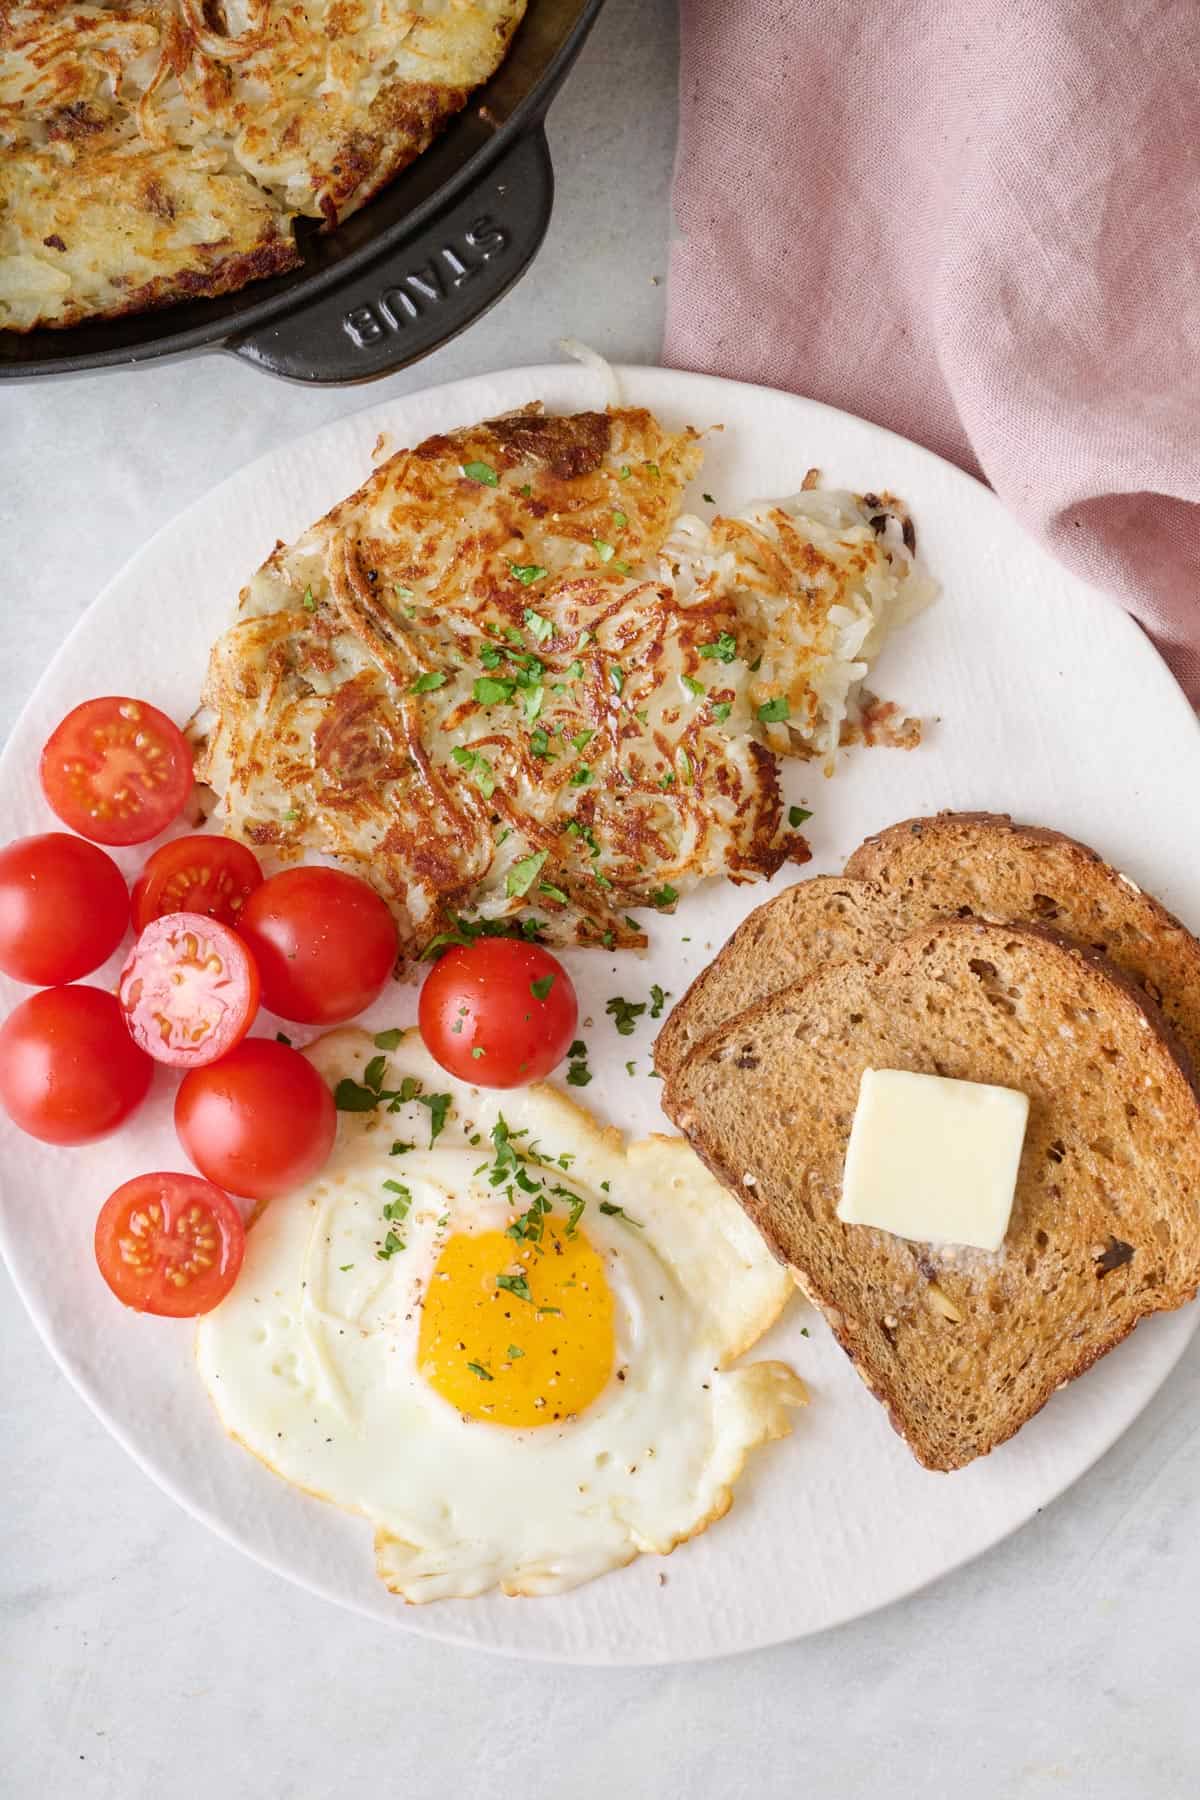 Crispy hash browns on a plate with cherry tomatoes, toast with butter, and a fried egg.